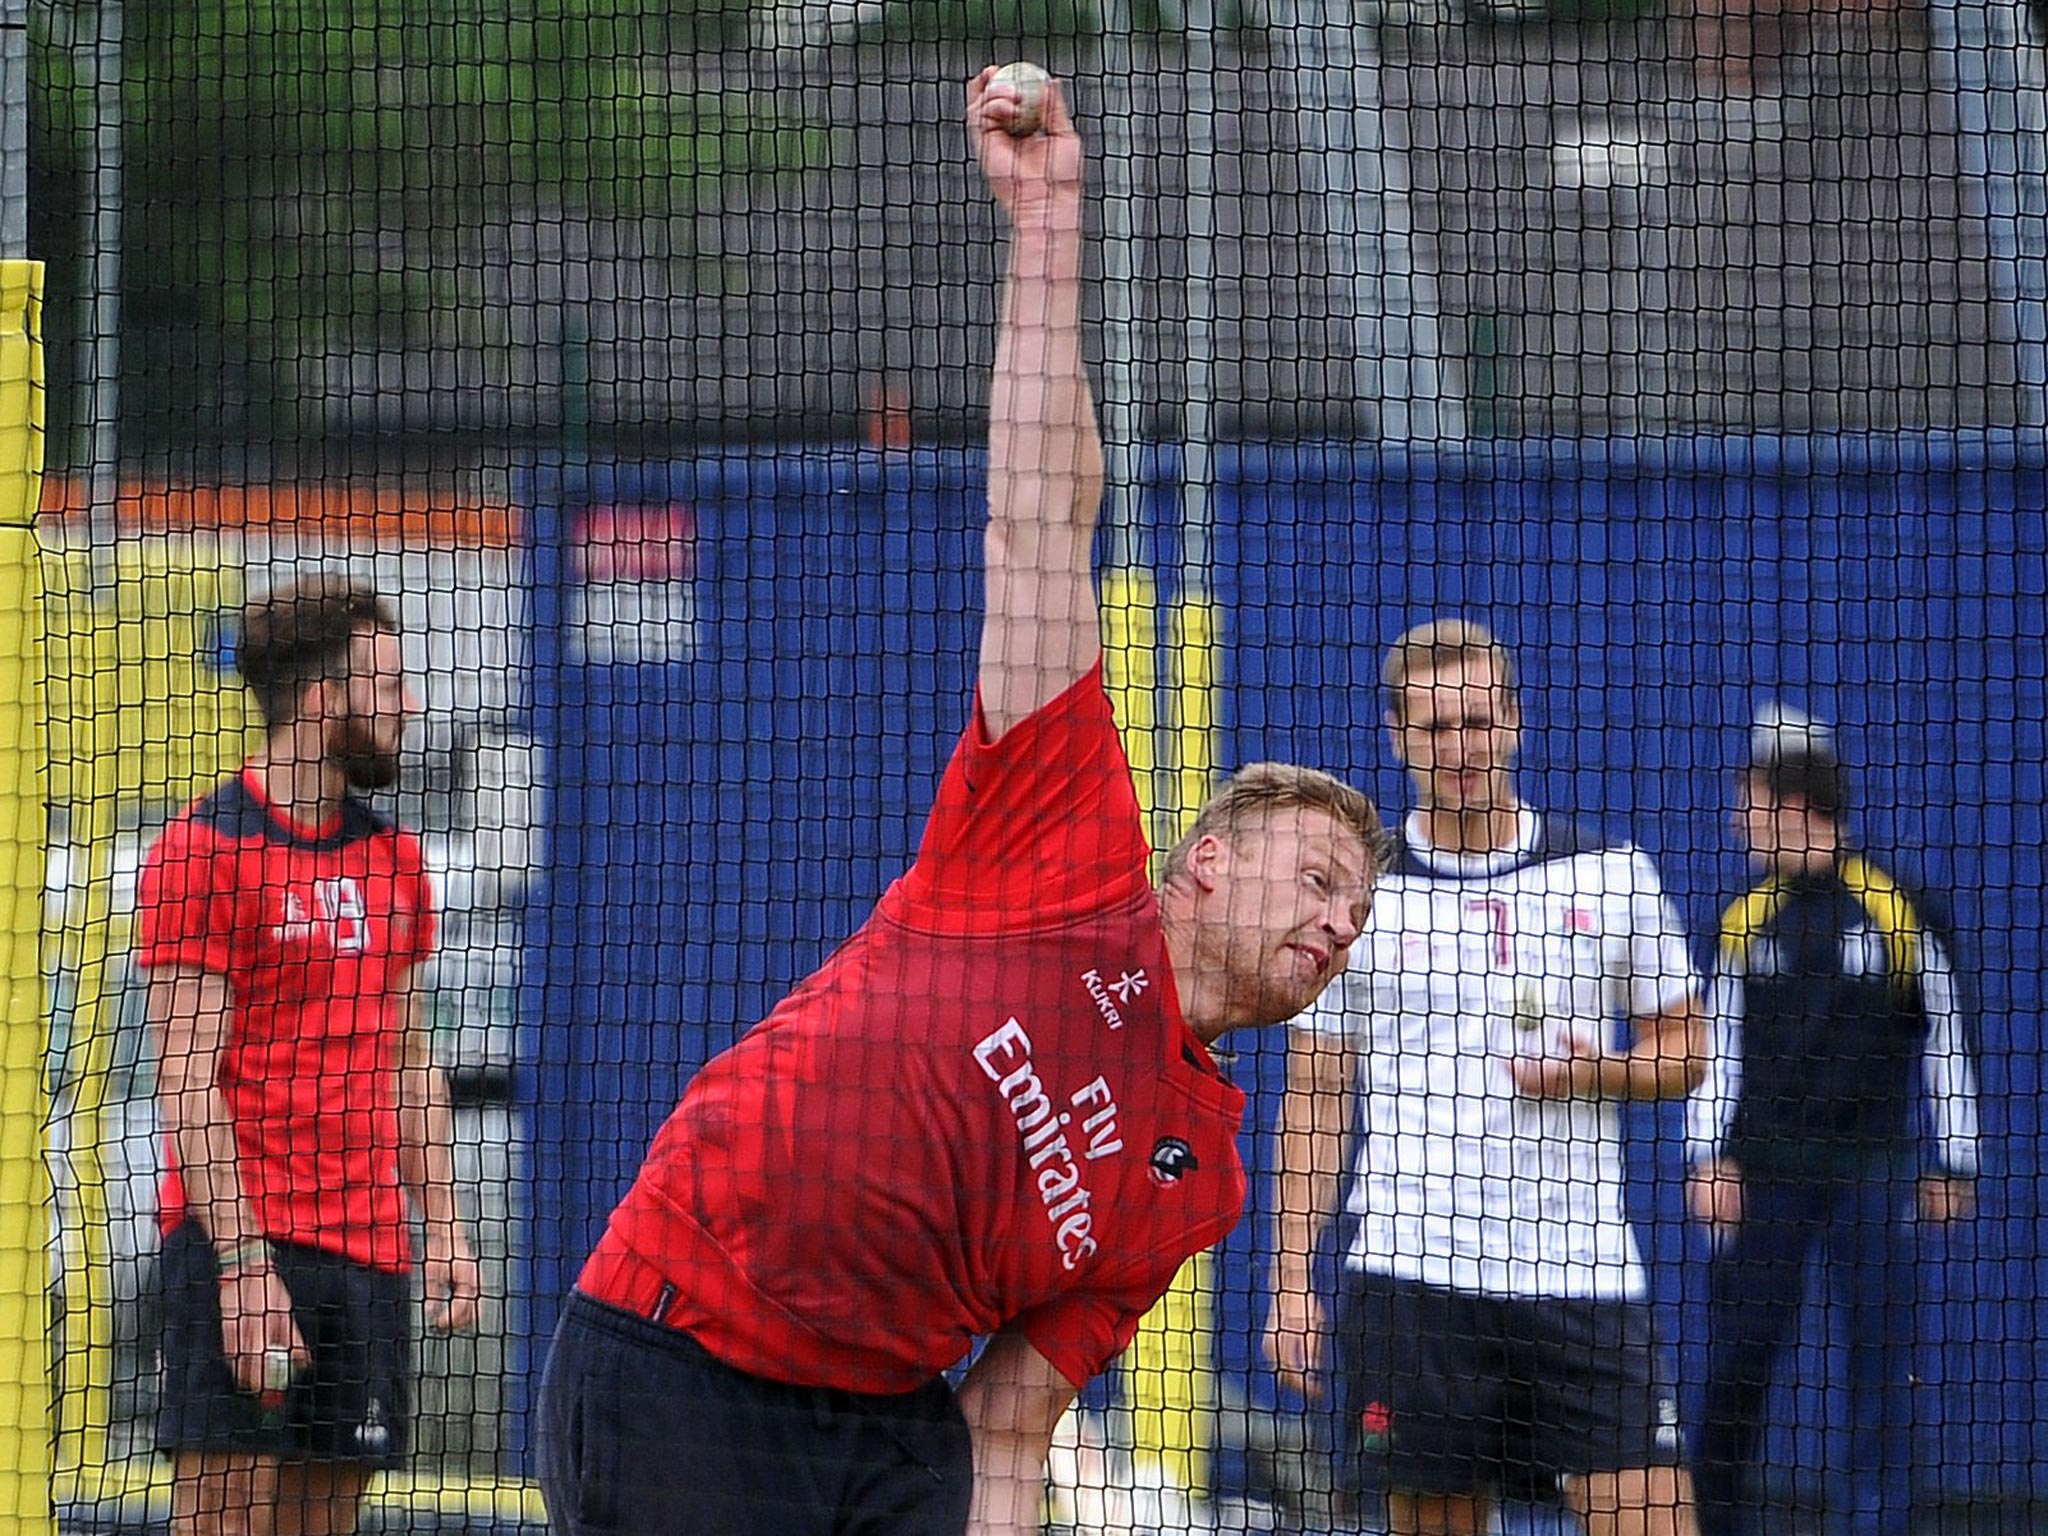 Andrew Flintoff bowling in the nets at Old Trafford
yesterday